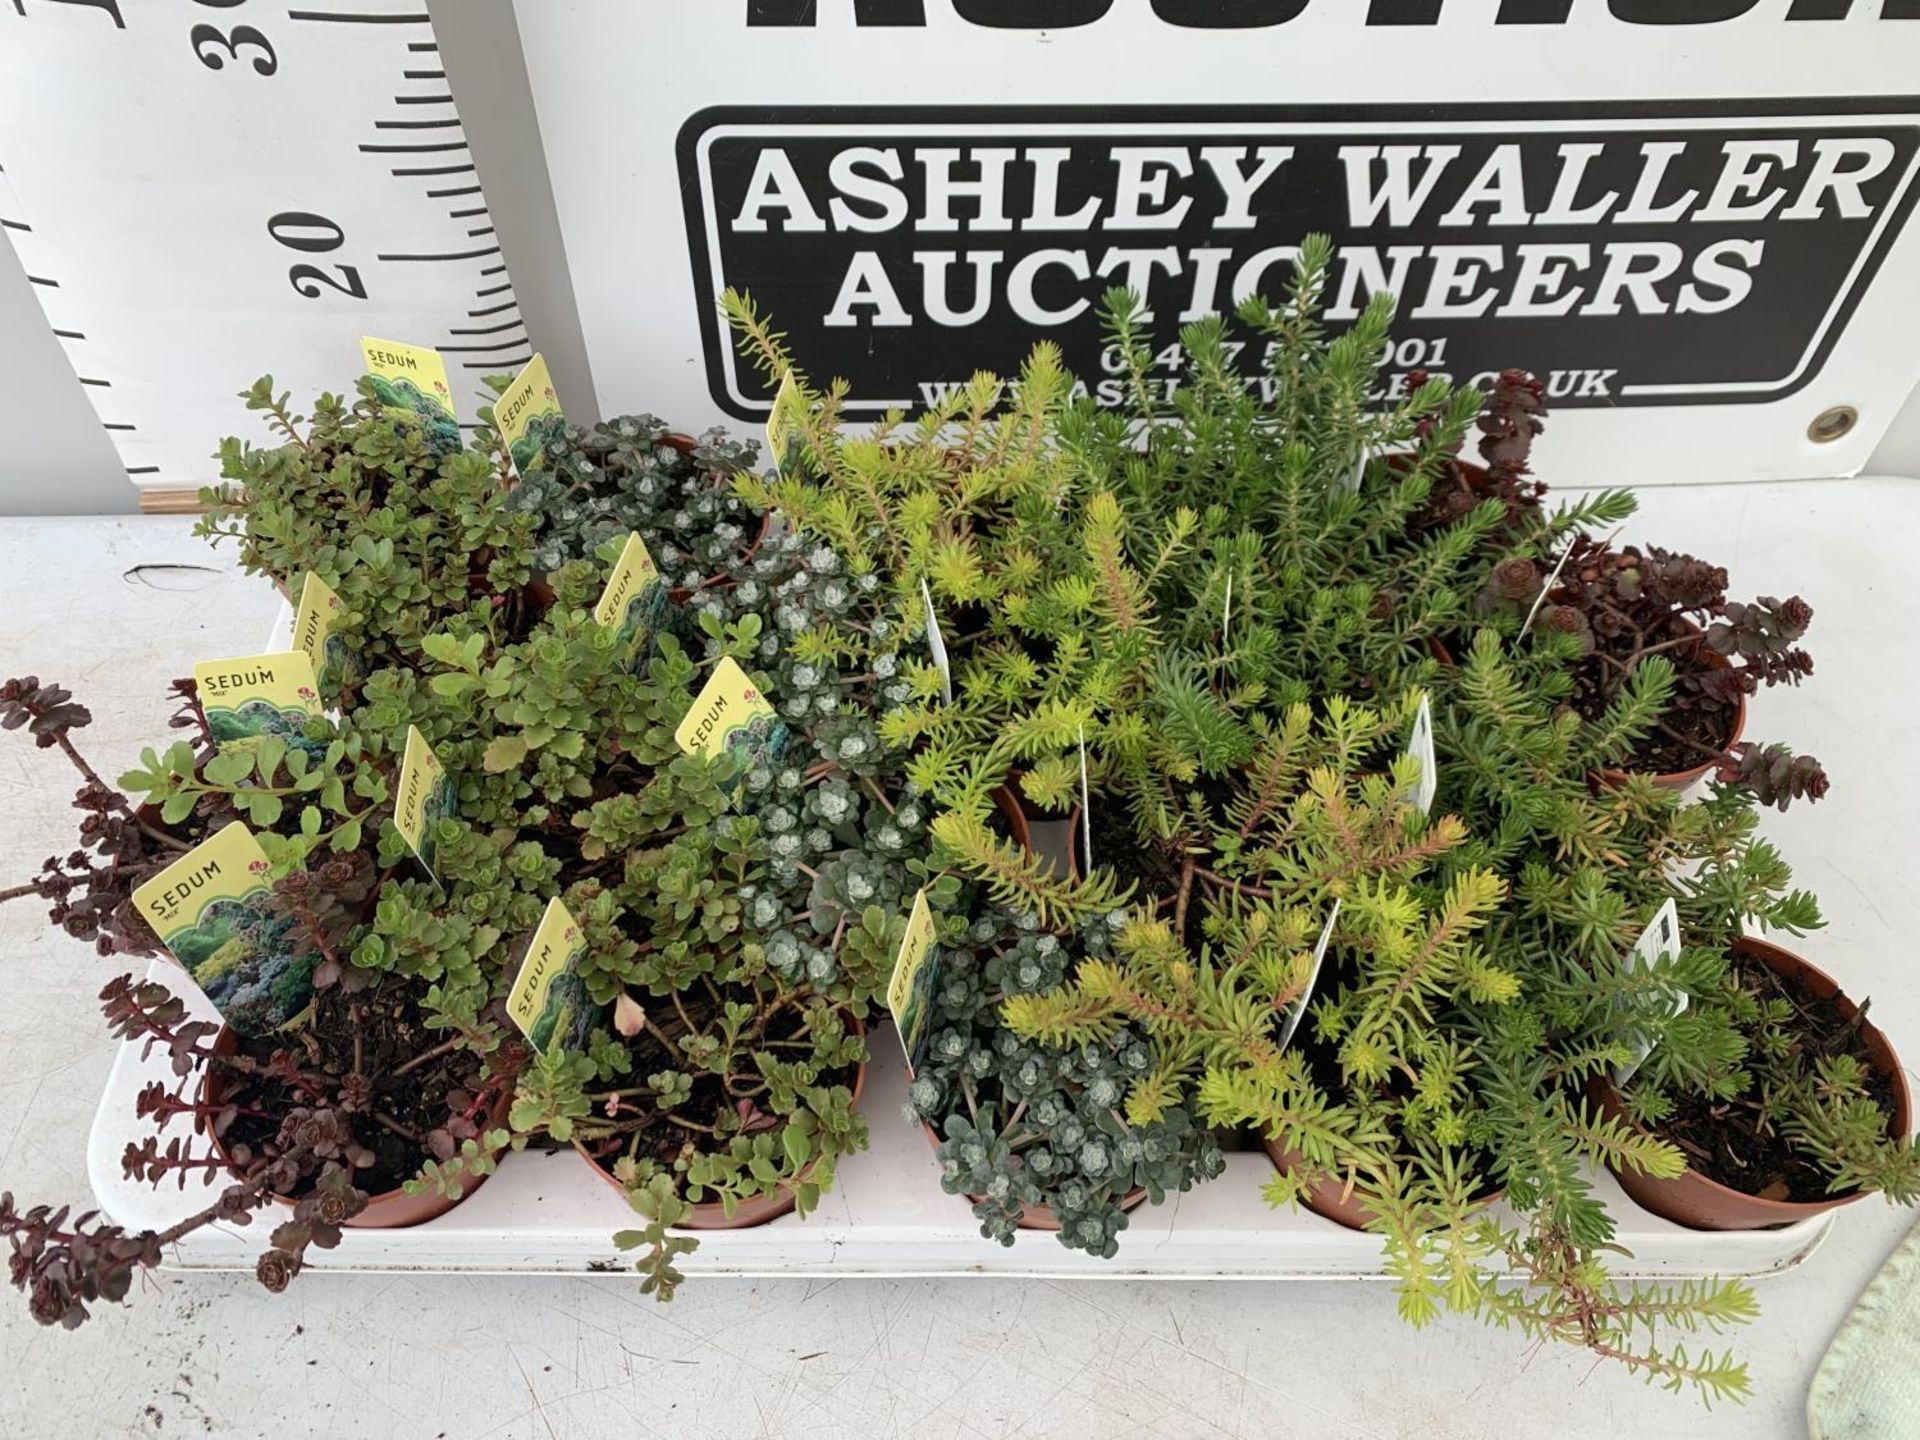 TWENTY MIXED SEDUMS ON A TRAY PLUS VAT TO BE SOLD FOR THE TWENTY - Image 6 of 10